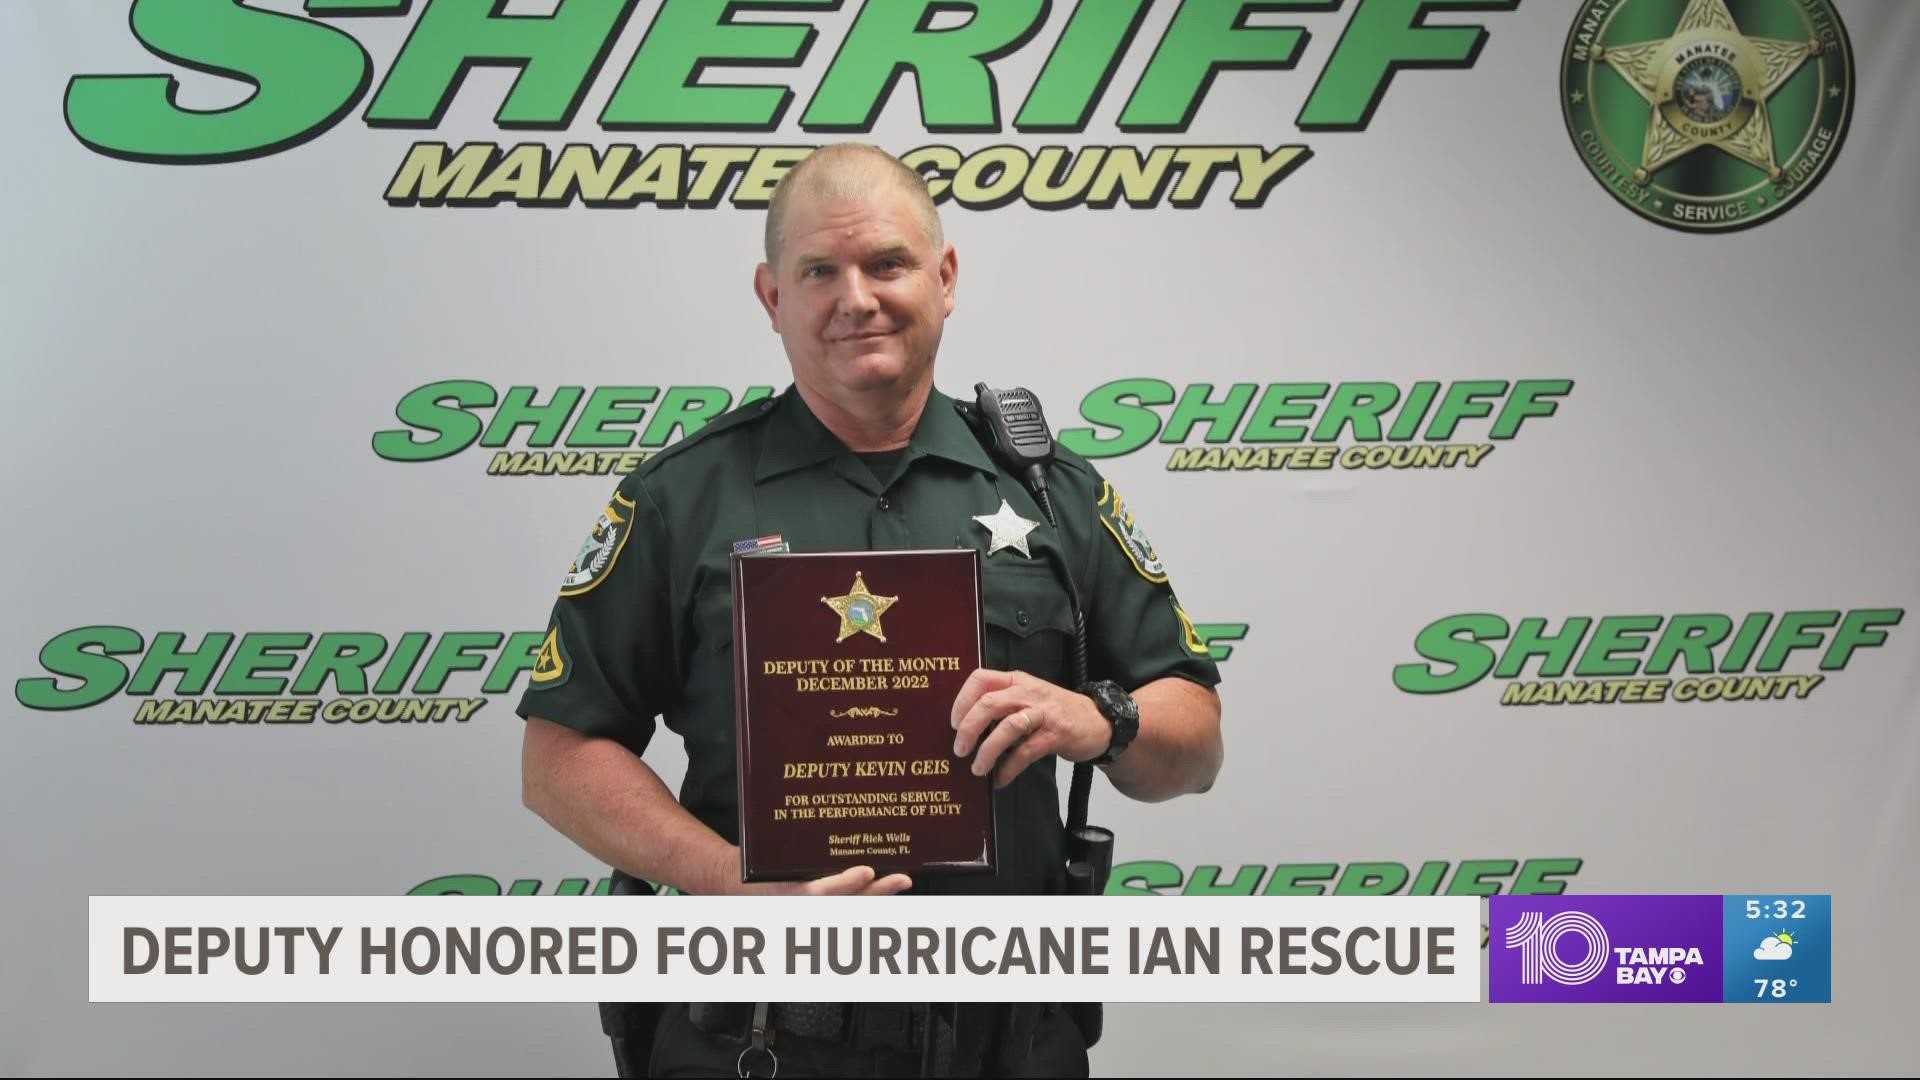 Deputy Kevin Geis was named Manatee County Sheriff's Office Deputy of the Month for December 2022 for his quick response and actions to save a woman's life.